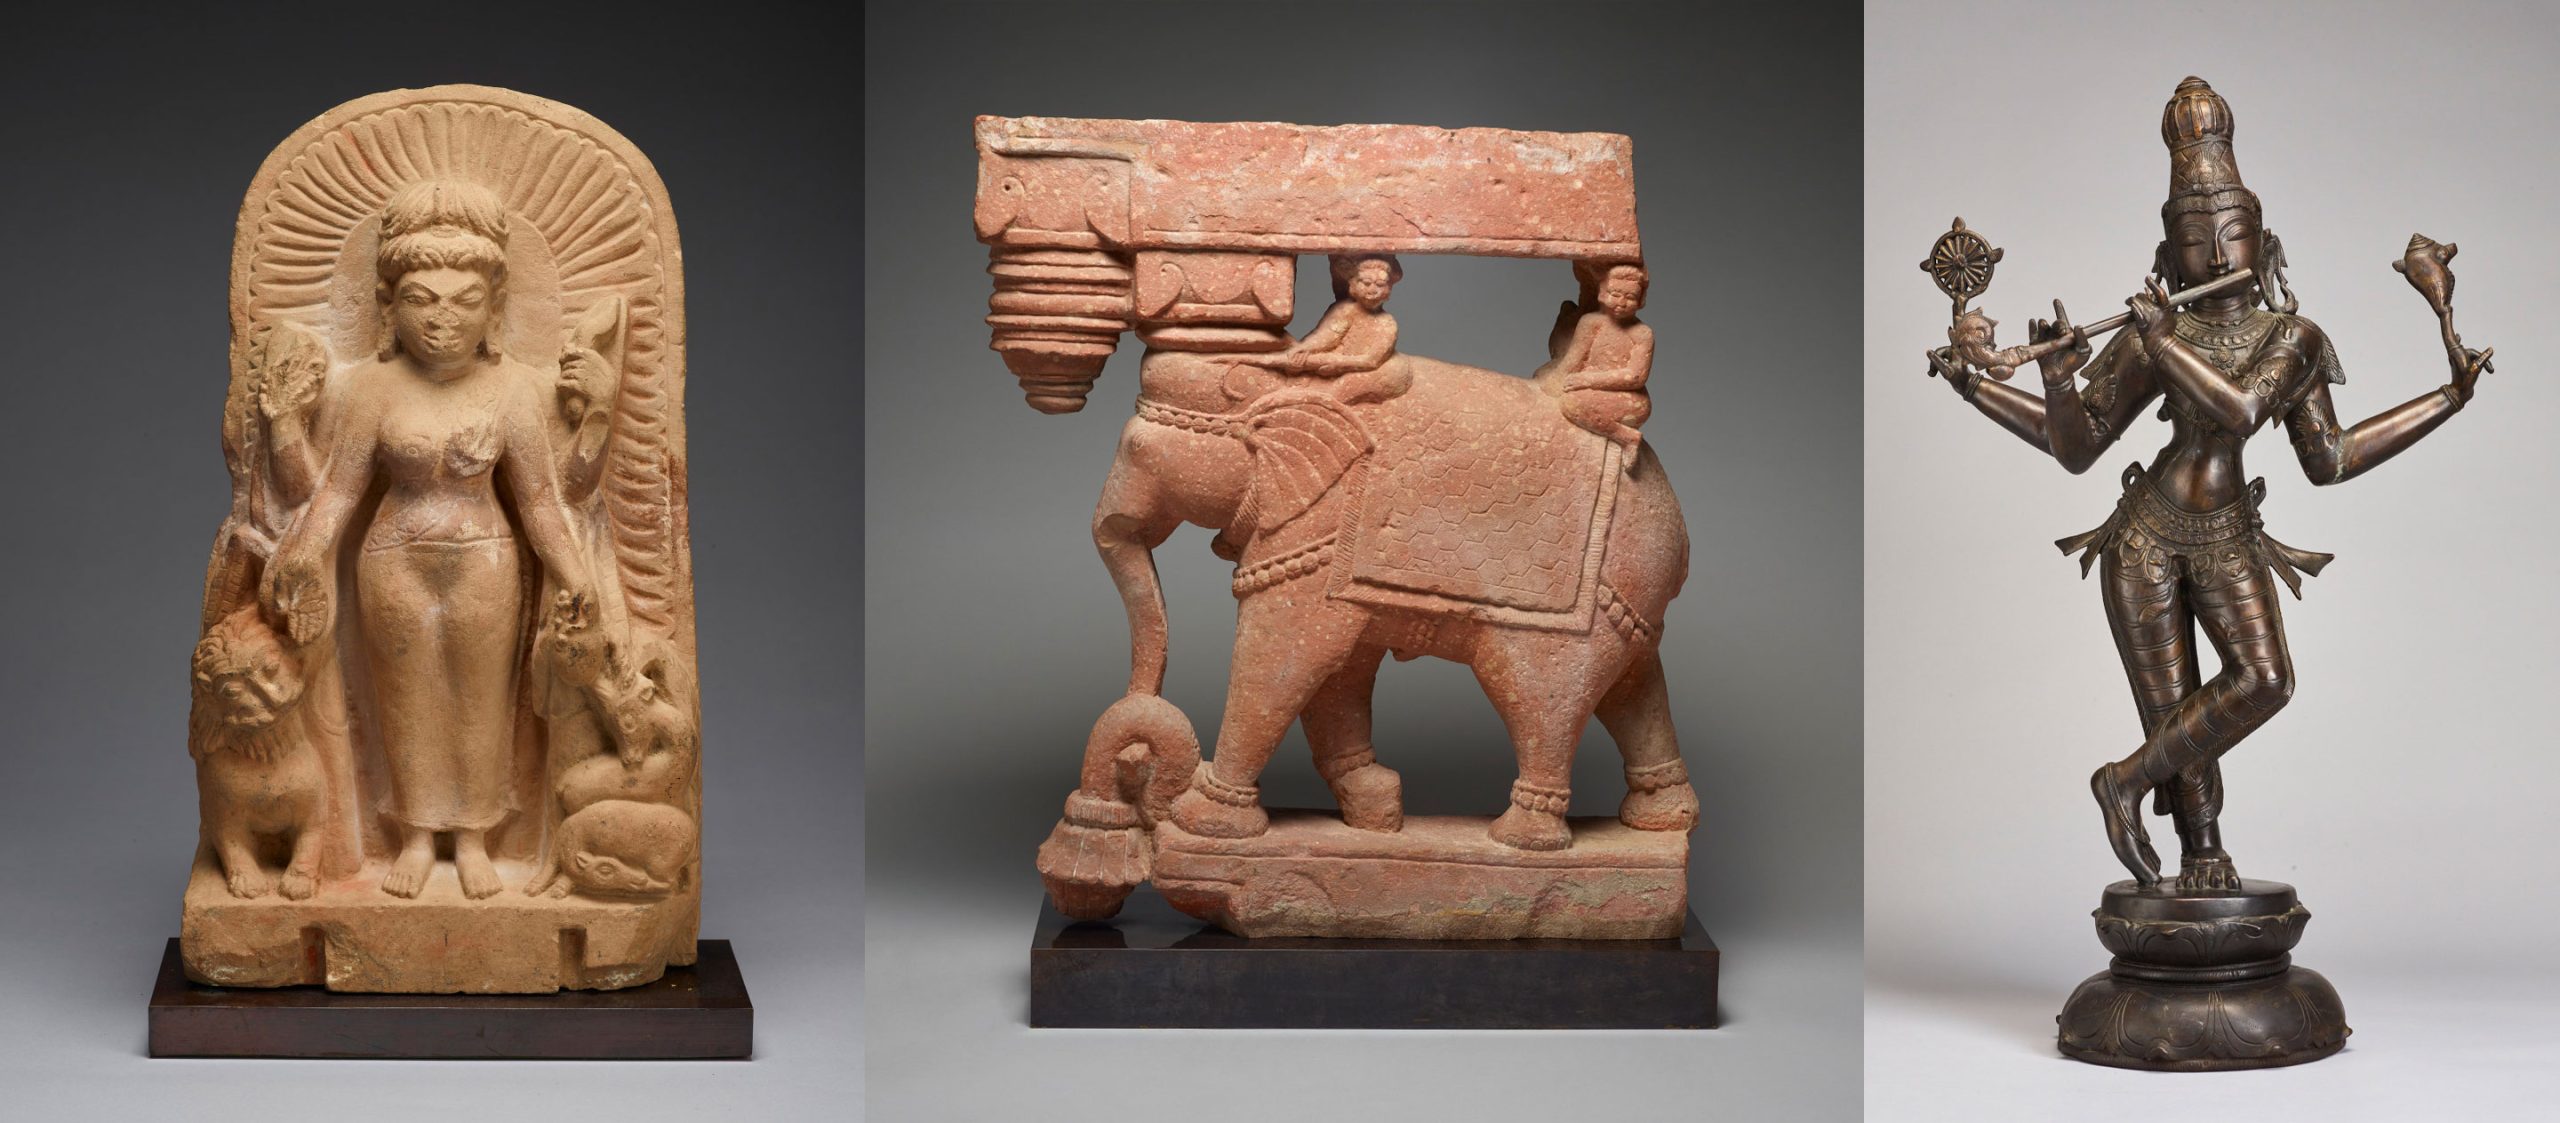 Unidentified artists who worked in North India, Durga/Parvati with Lion, Doe, and Buck, 10th century, revival style of the Gupta period (319–467 CE). Sandstone. Collection of the Birmingham Museum of Art; Gift from the Asian Art Collection of Dr. and Mrs. William T. Price, 2001.68. Photography credit: Erin Croxton; Unidentified artists who worked in India or Pakistan, Elephant with Riders Roof Bracket, 18th century, Mughal period (1526–1857). Red sandstone. Collection of Birmingham Museum of Art; Gift from the Asian Art Collection of Dr. and Mrs. William T. Price in memory of Dr. M. Bruce Sullivan, 2003.55. Photography credit: Carmen Gonzalez Fraile; Unidentified artists who worked in Tamil Nadu, South India, Vishnu in the Form of Venugopala, the Flute-Player, 19th century revival style of the 12th–16th century. Cast bronze. Collection of the Art Fund, Inc. at the Birmingham Museum of Art; Gift of Emily Bourne Grigsby, AFI.30.2010a-b. Photography credit: Erin Croxton.